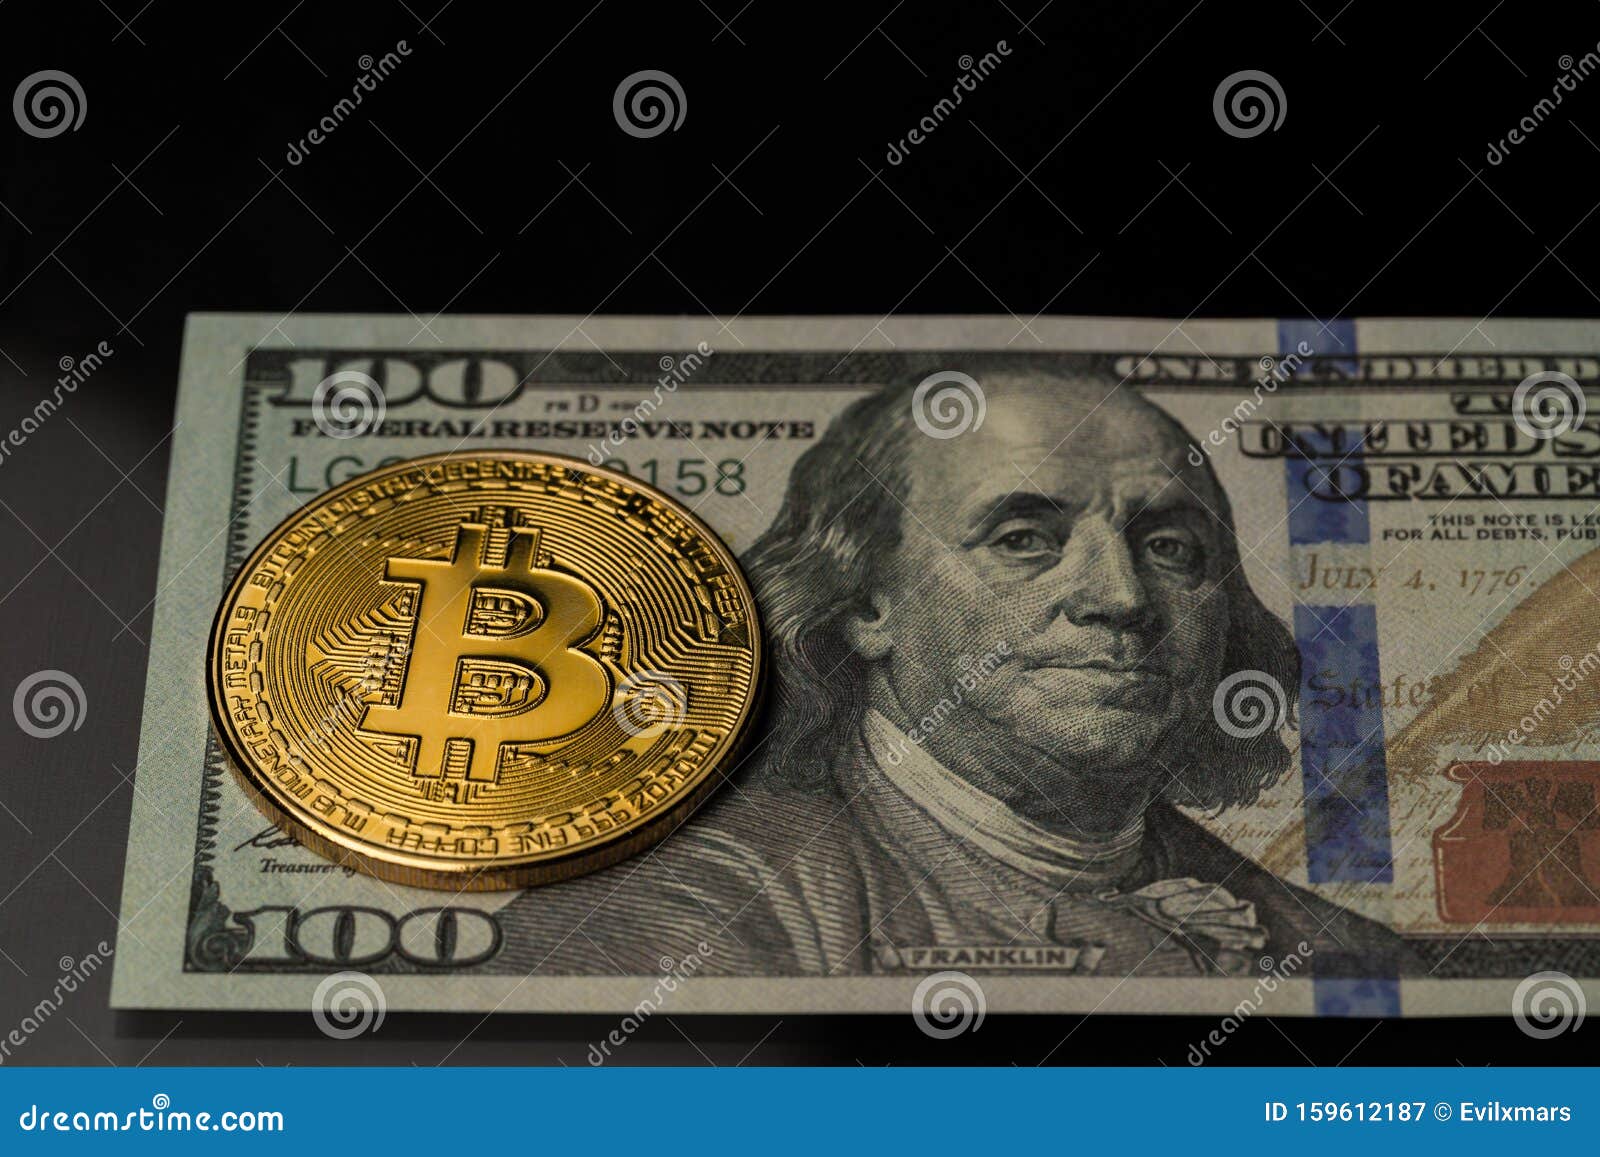 Crypto Currency Bitcoin On A 100 Dollar Bill Stock Image ...